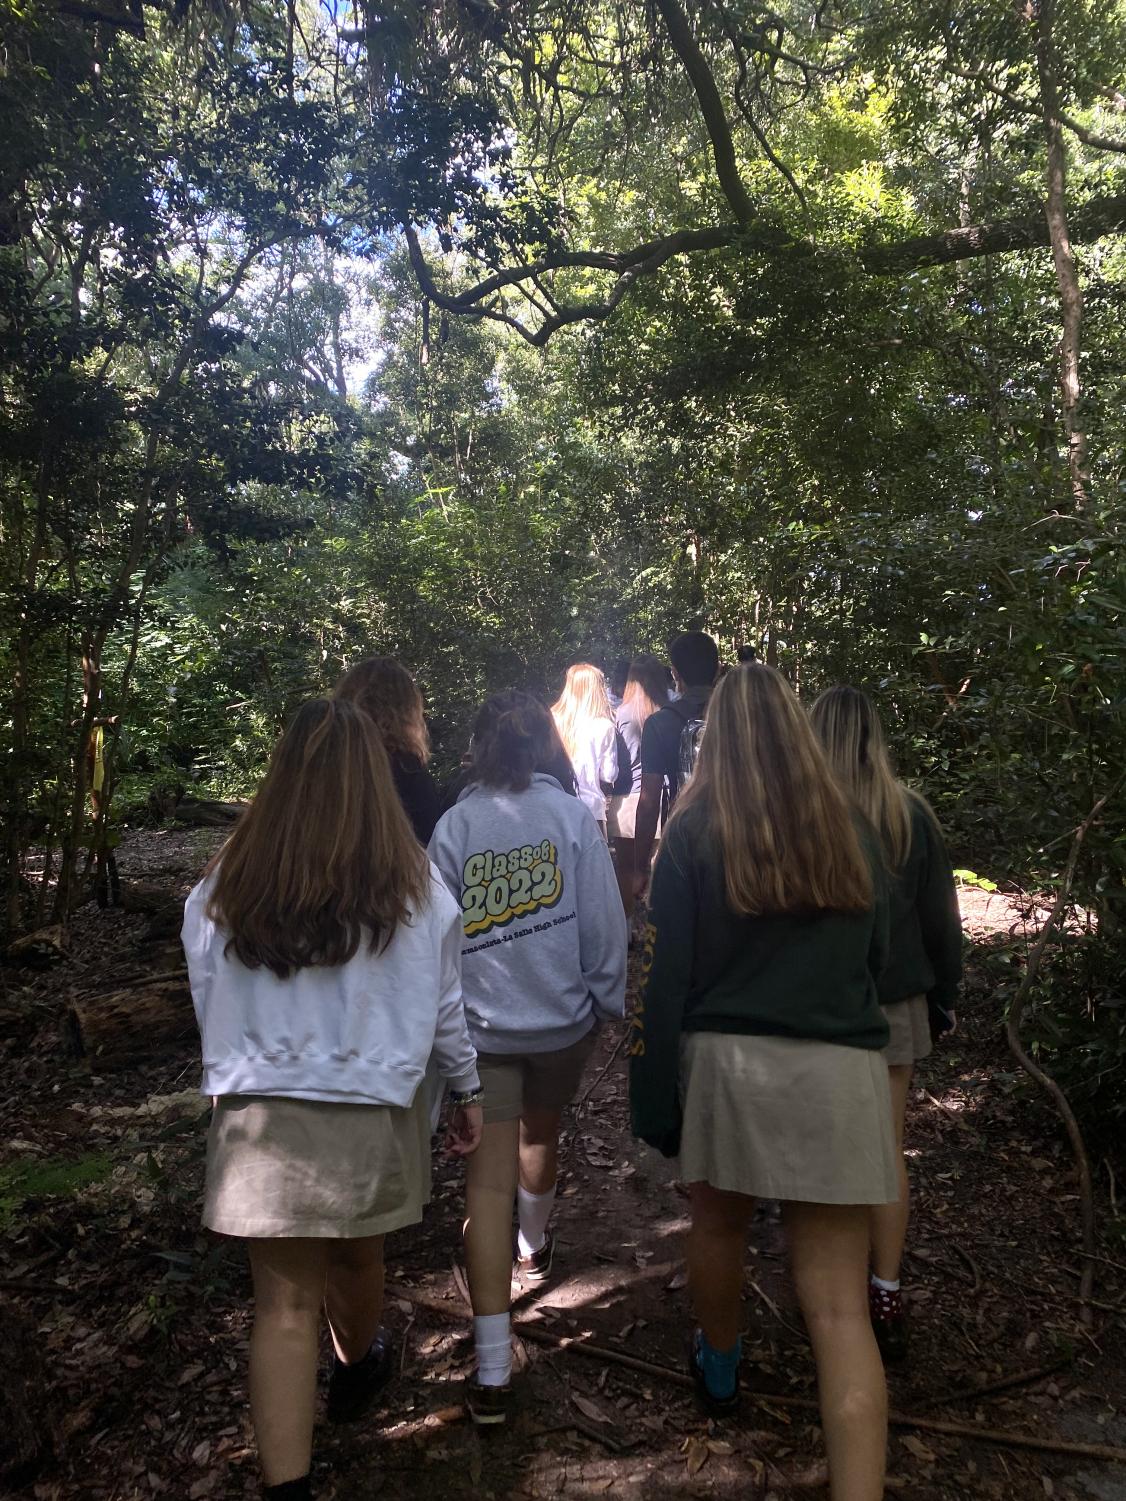 La Salle students trot through the woods, playing along with The Crucible production.